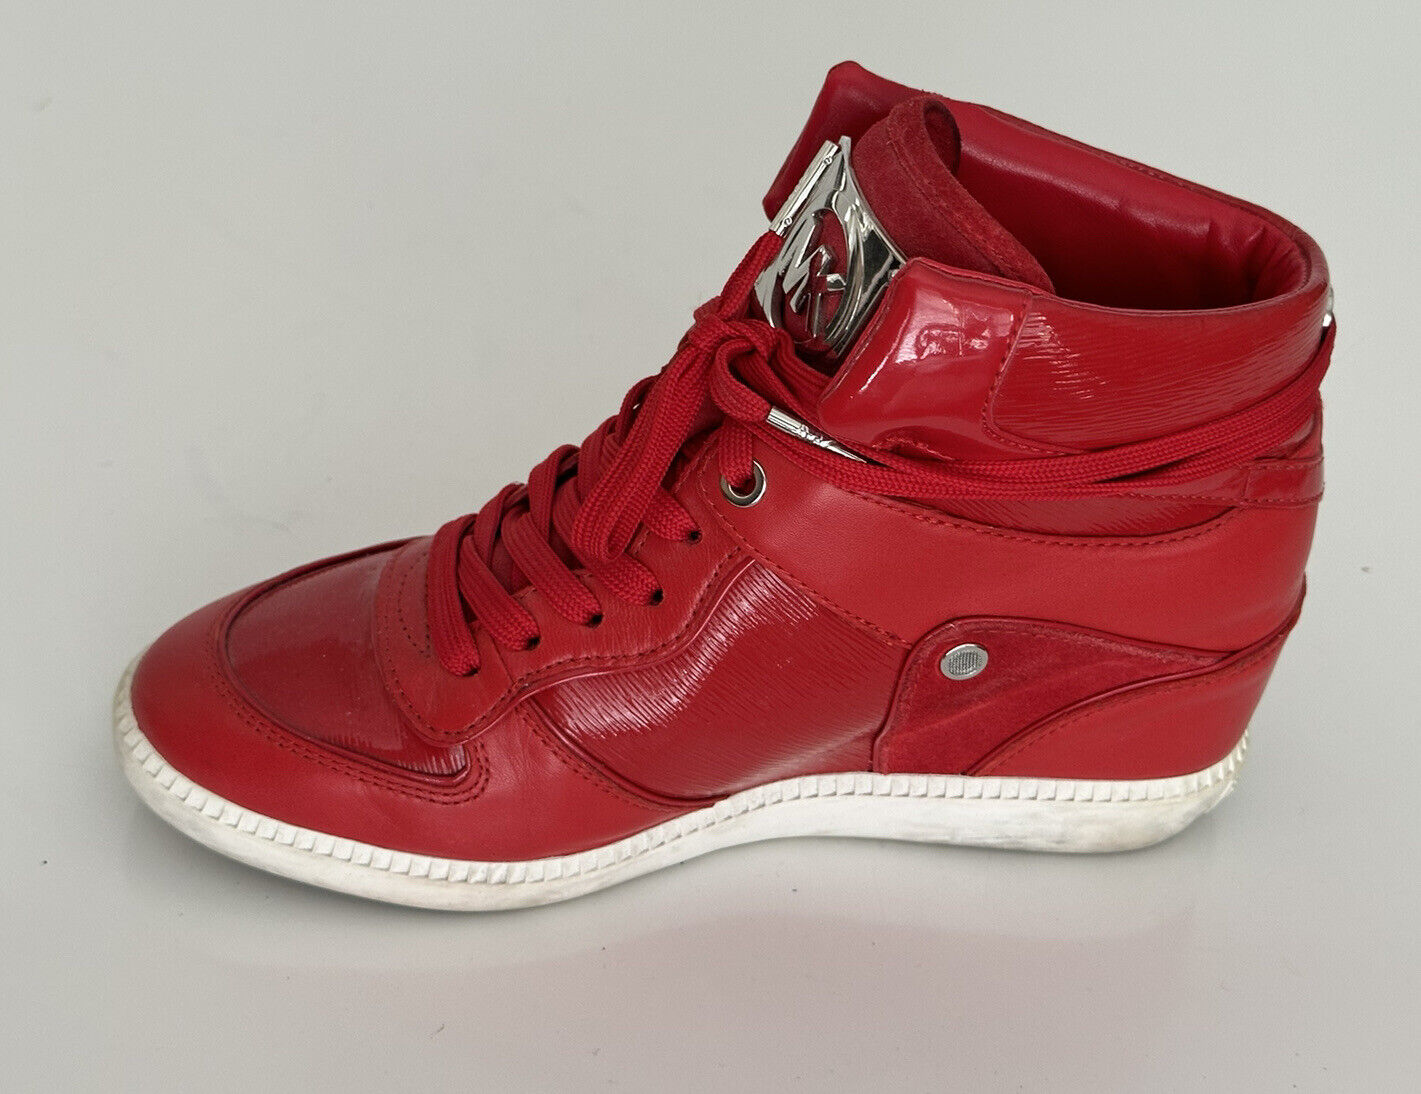 Michael Kors Nikko High Top Leather Sneakers Red Size 8 US (38.5 Euro)